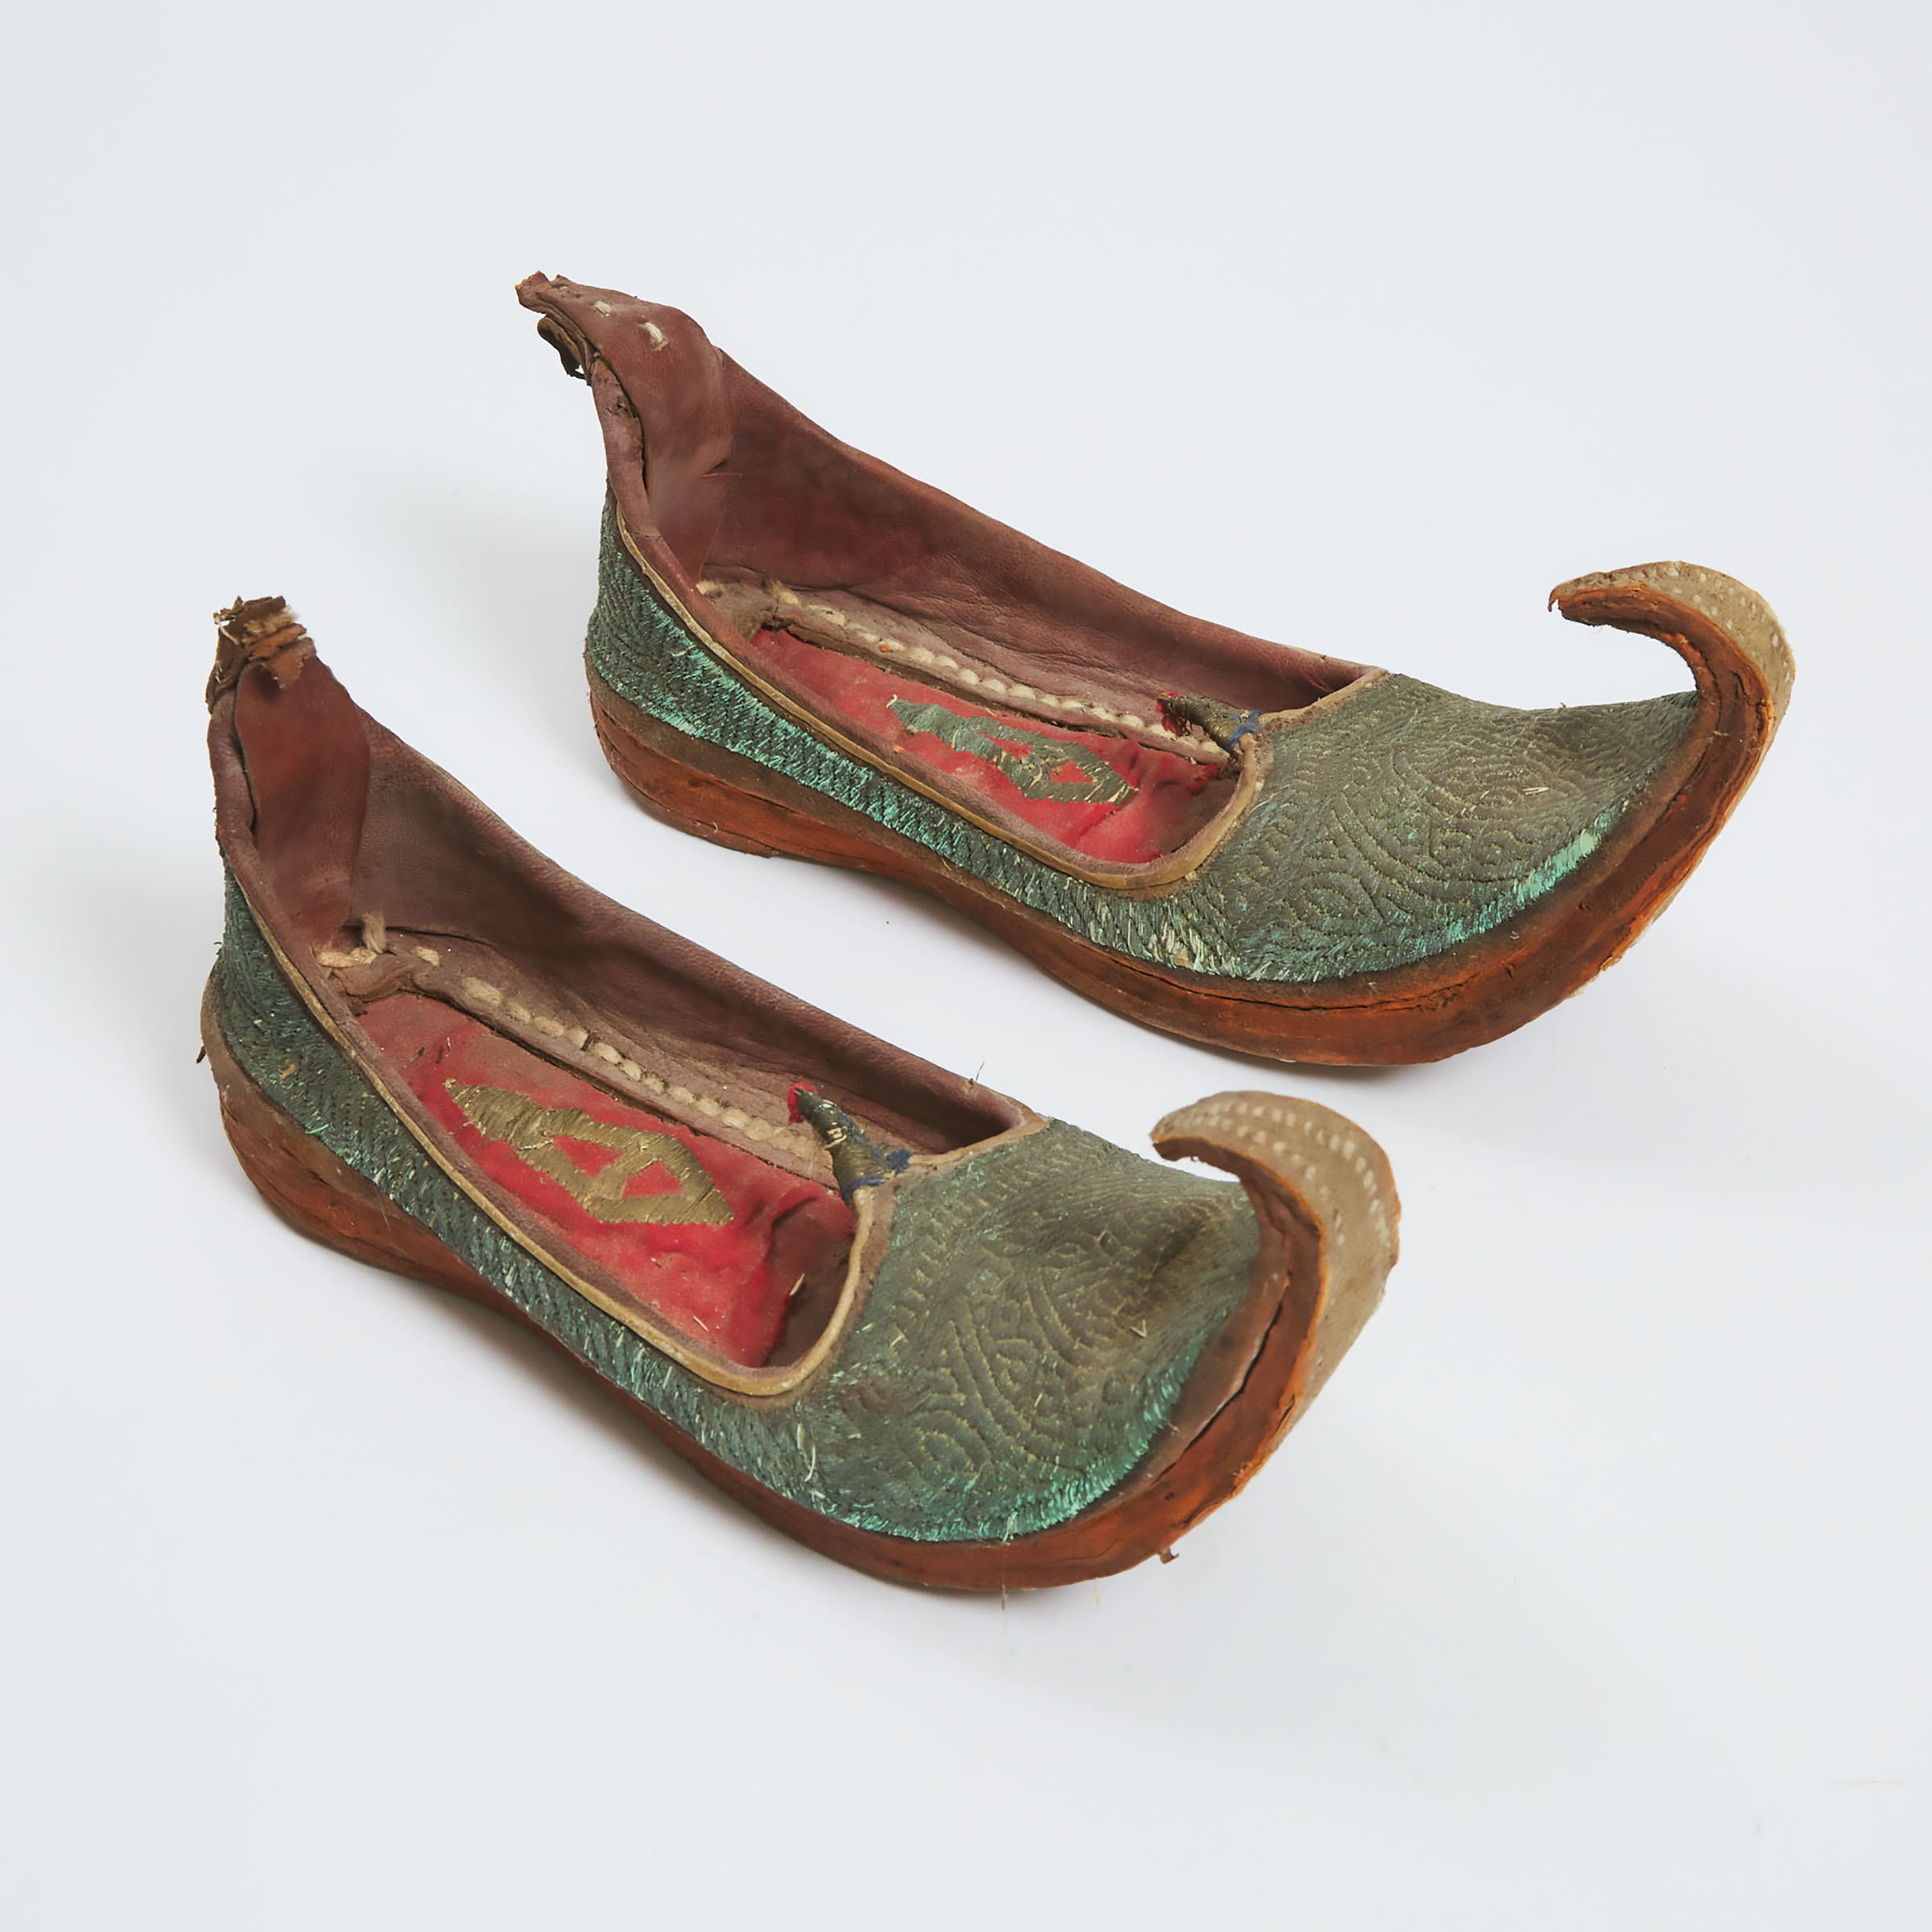 A Pair of Mughal Khussa/Mojari Leather Shoes, 19th/Early 20th Century